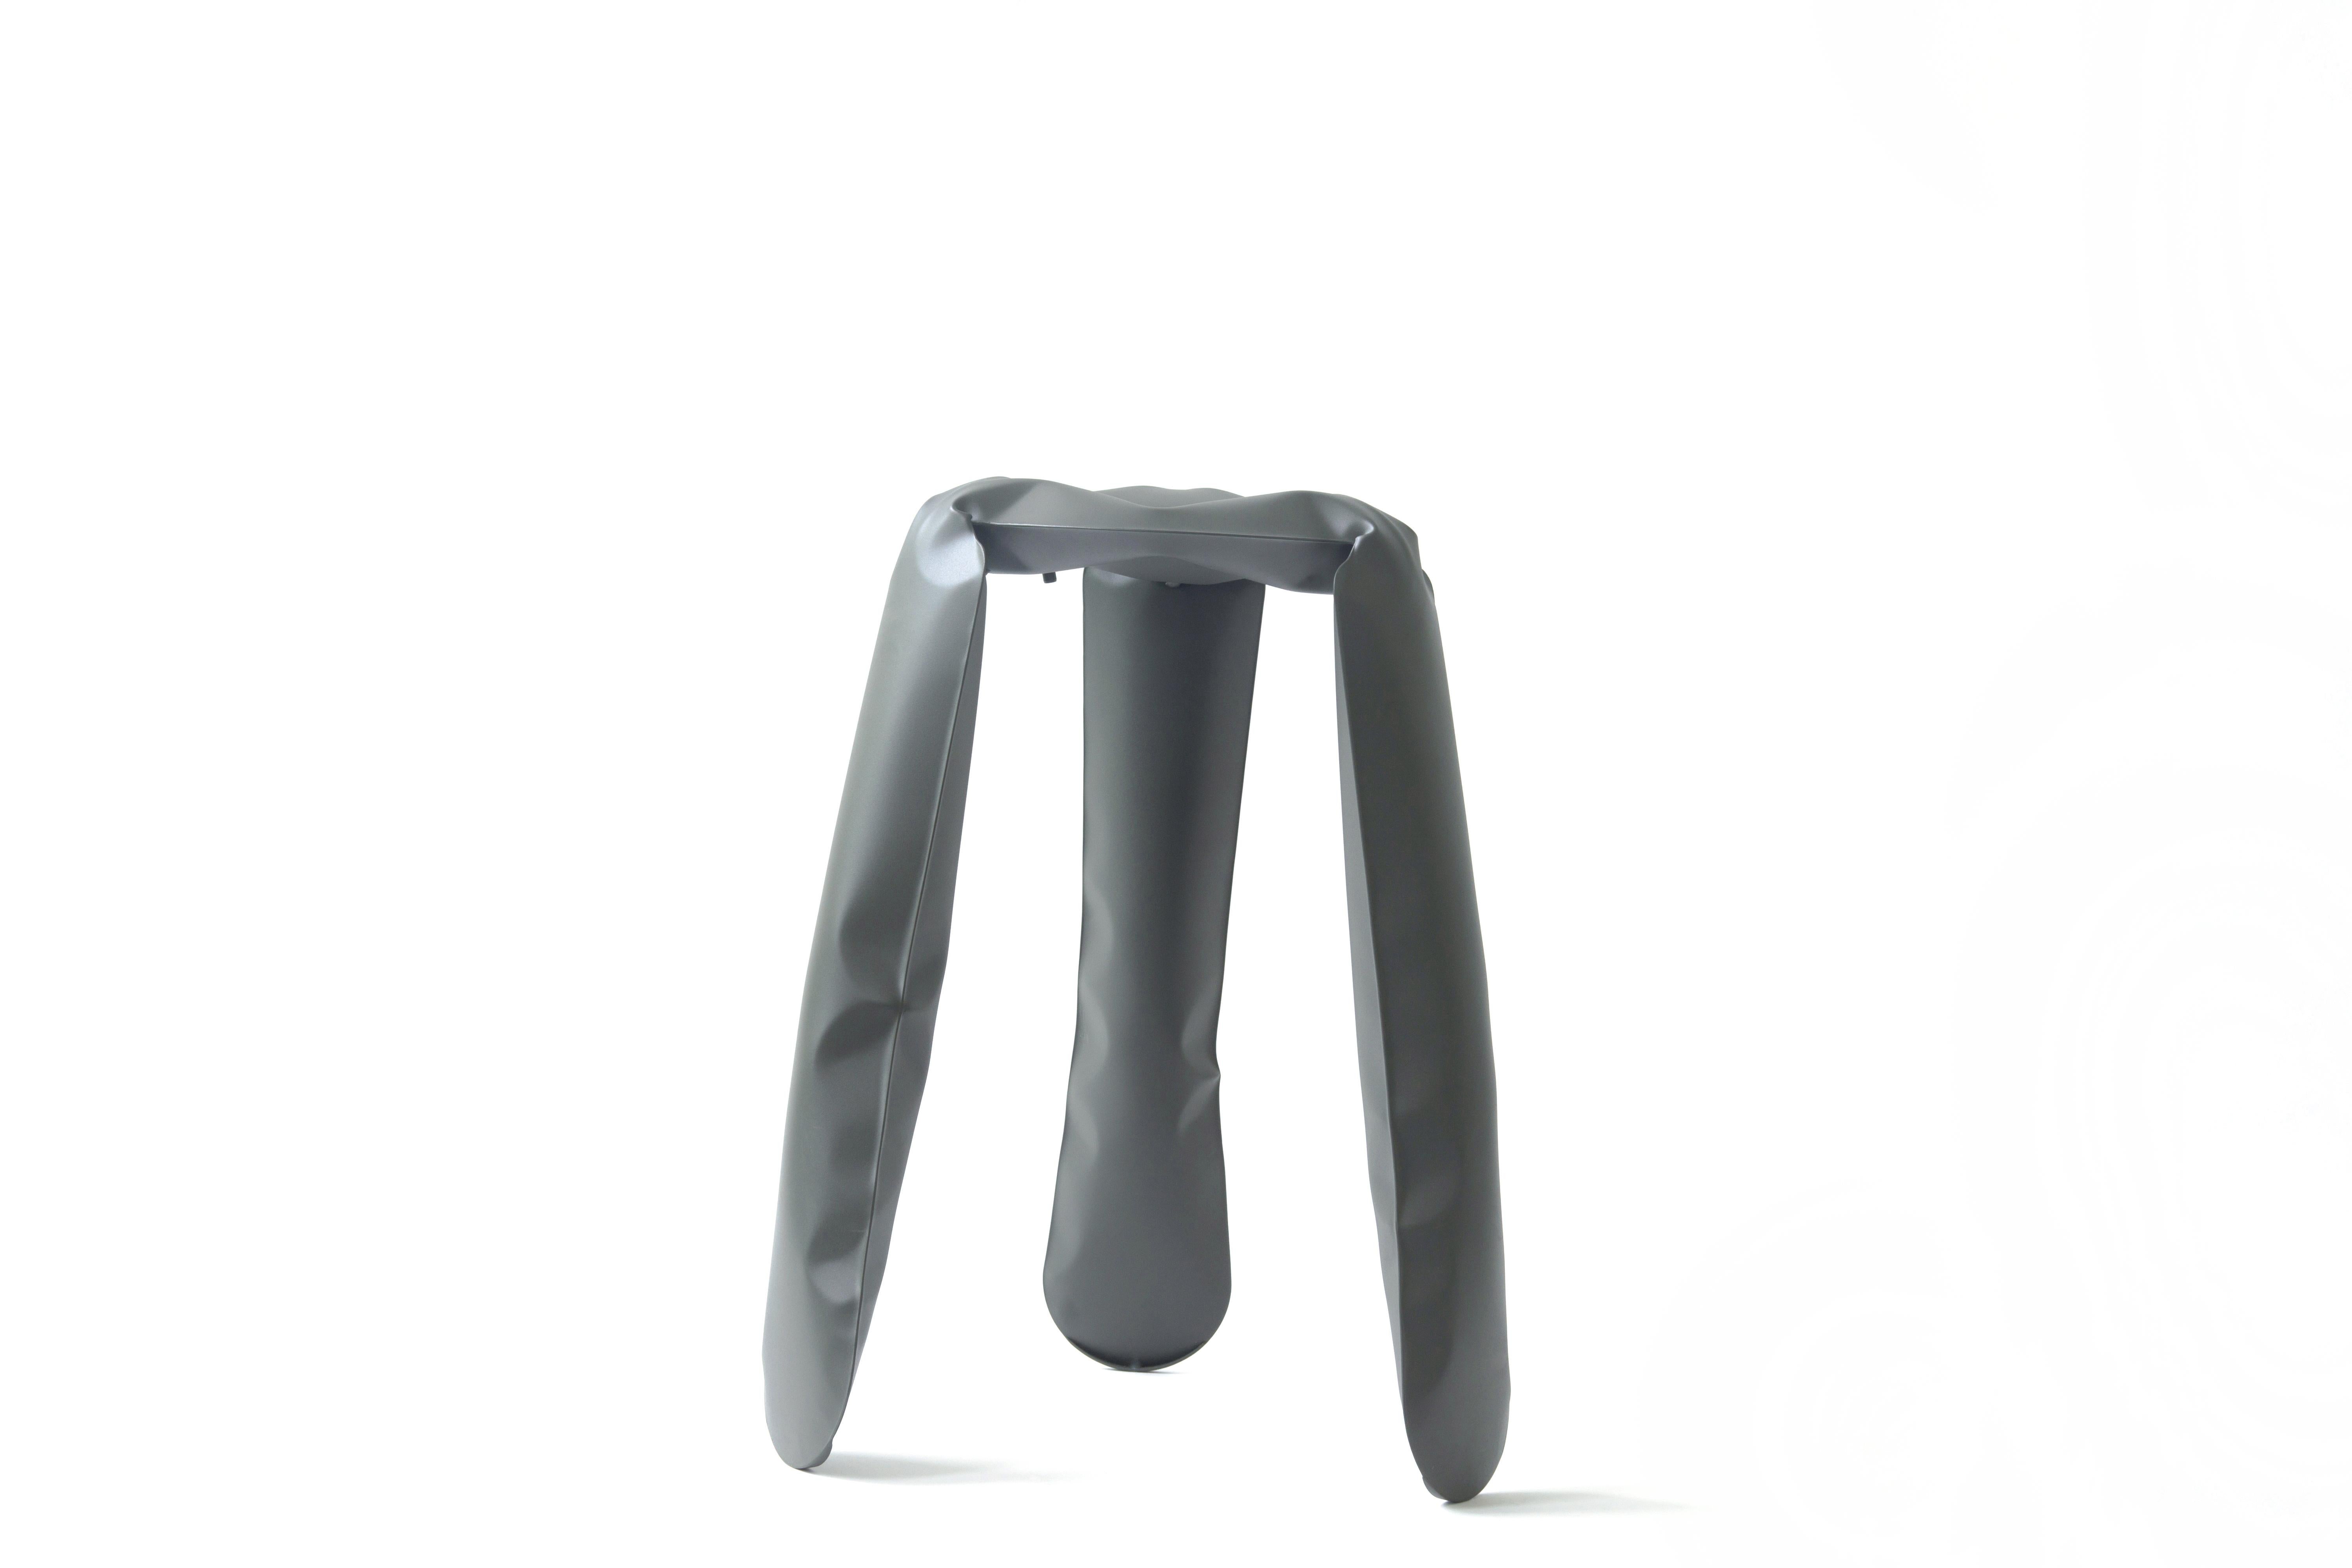 Umbra Gray steel Kitchen Plopp stool by Zieta
Dimensions: D 35 x H 65 cm 
Material: Carbon steel. 
Finish: Powder-coated. 
Available in colors: Beige, black, blue, graphite, moss, umbra gray, and flamed gold. Available in Stainless Steel, Aluminum,